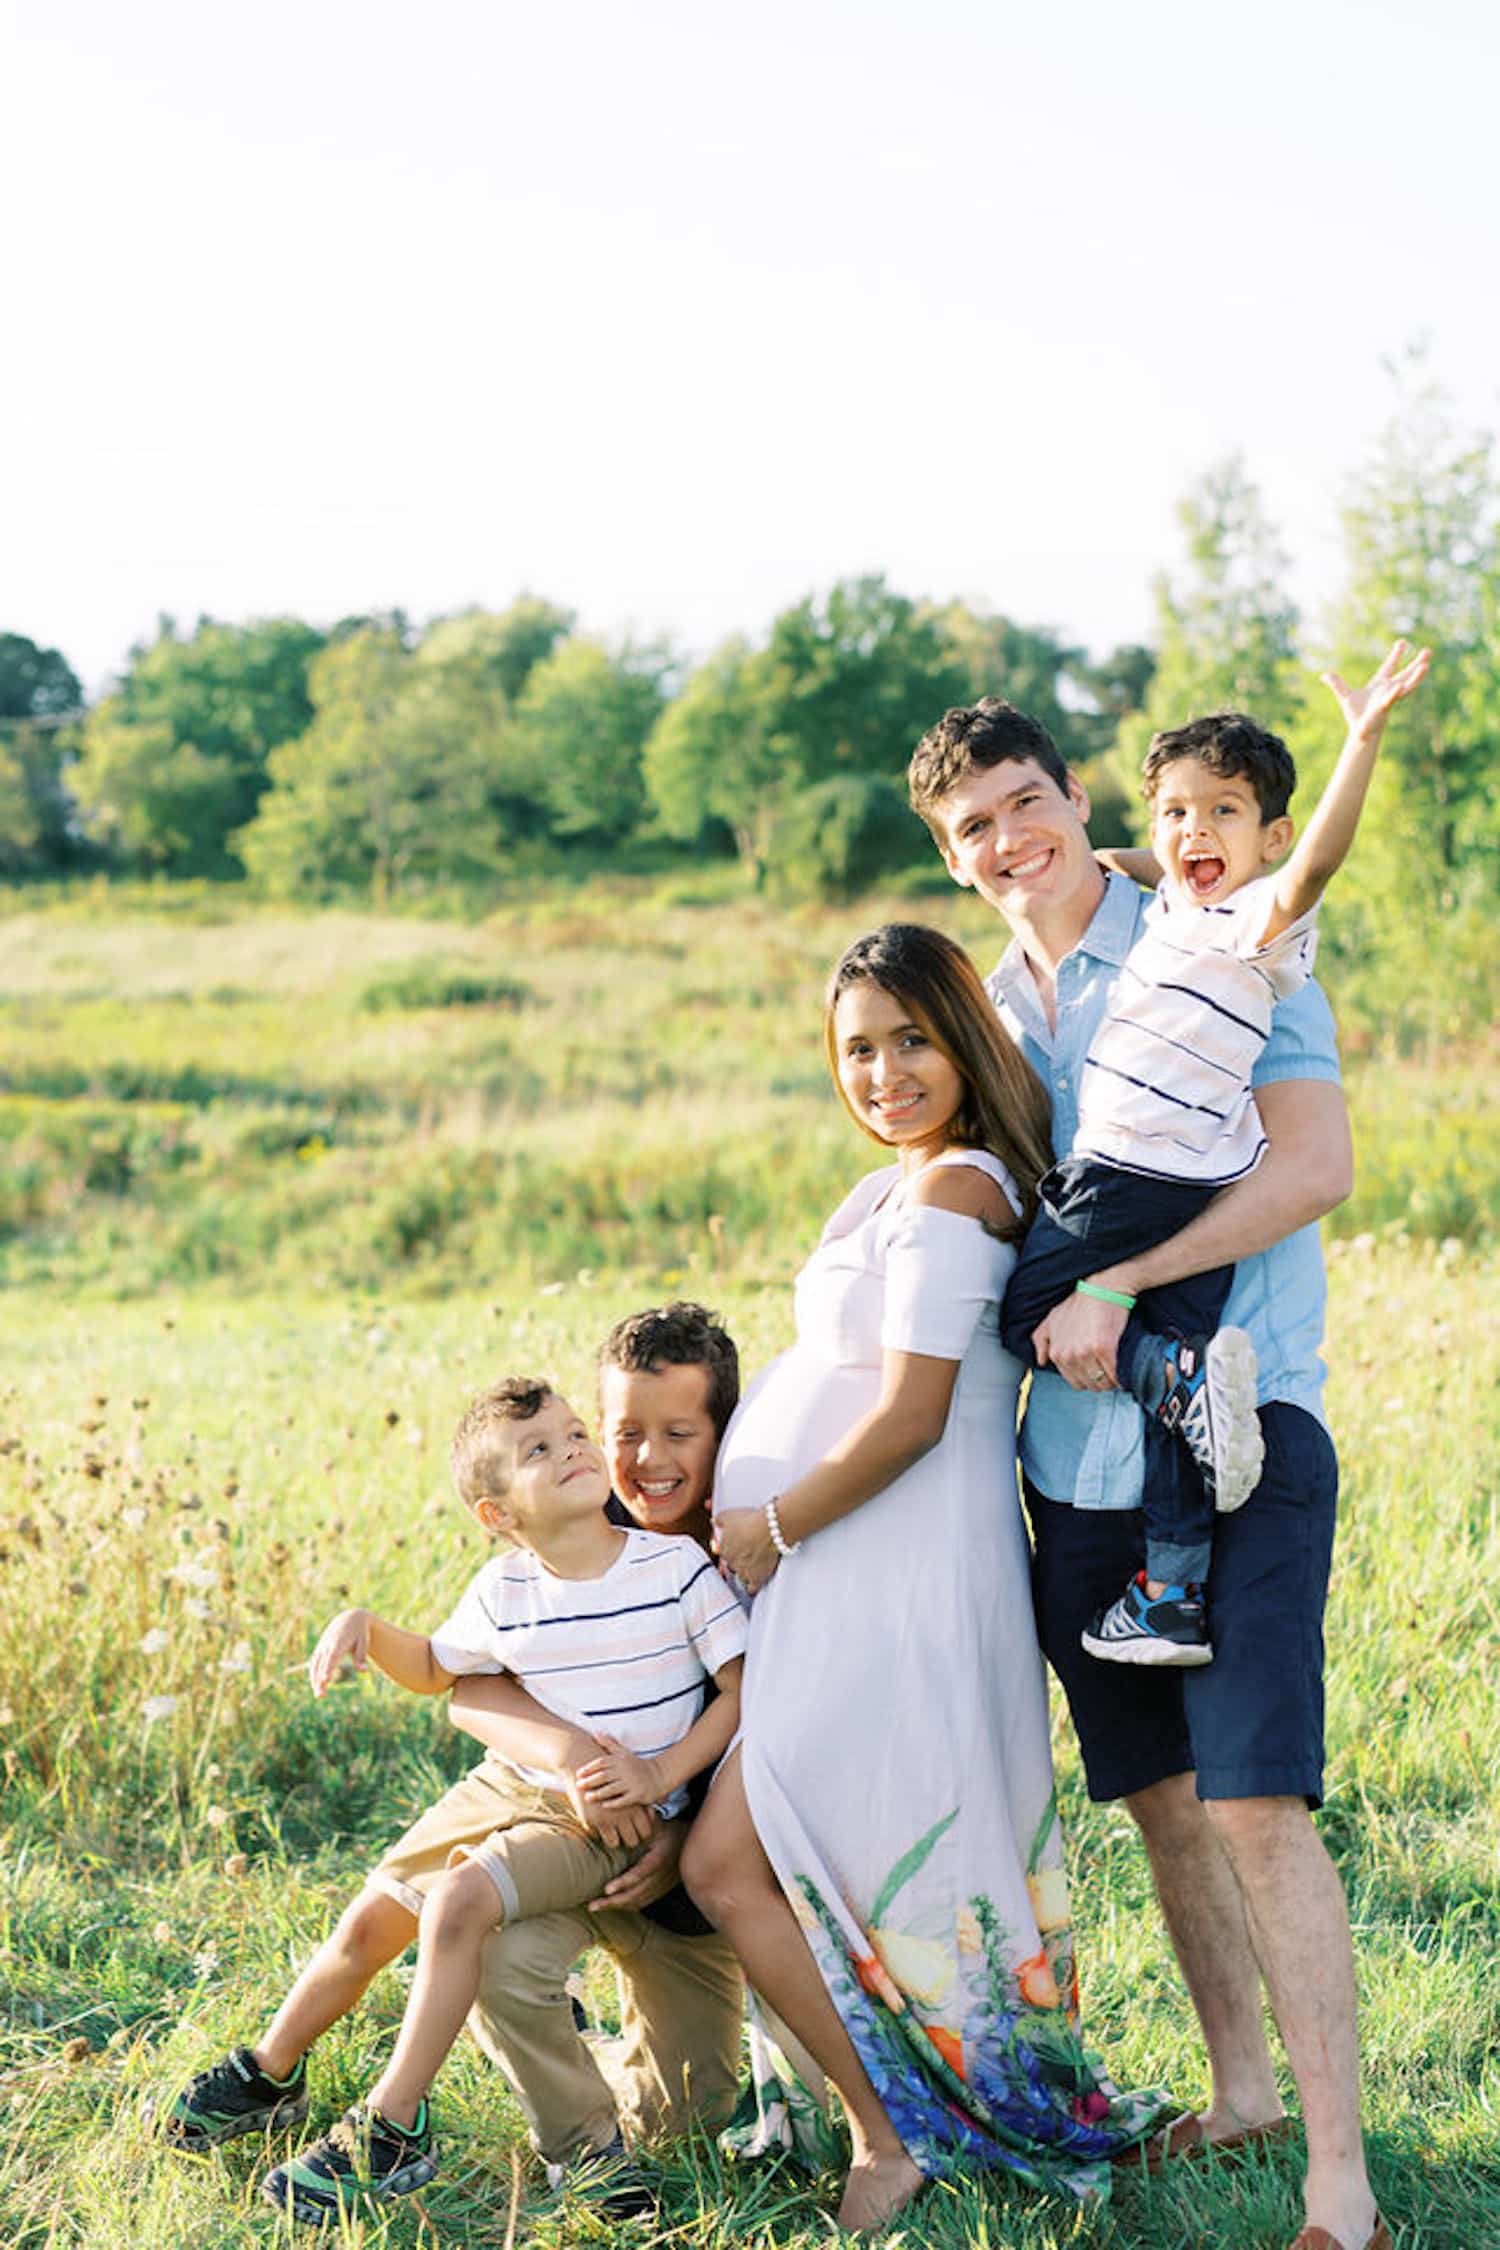 A pregnant mom smiles with her husband and three sons as they pose for a family photo in a field to celebrate The Benefits of Outsourcing as a Mompreneur.